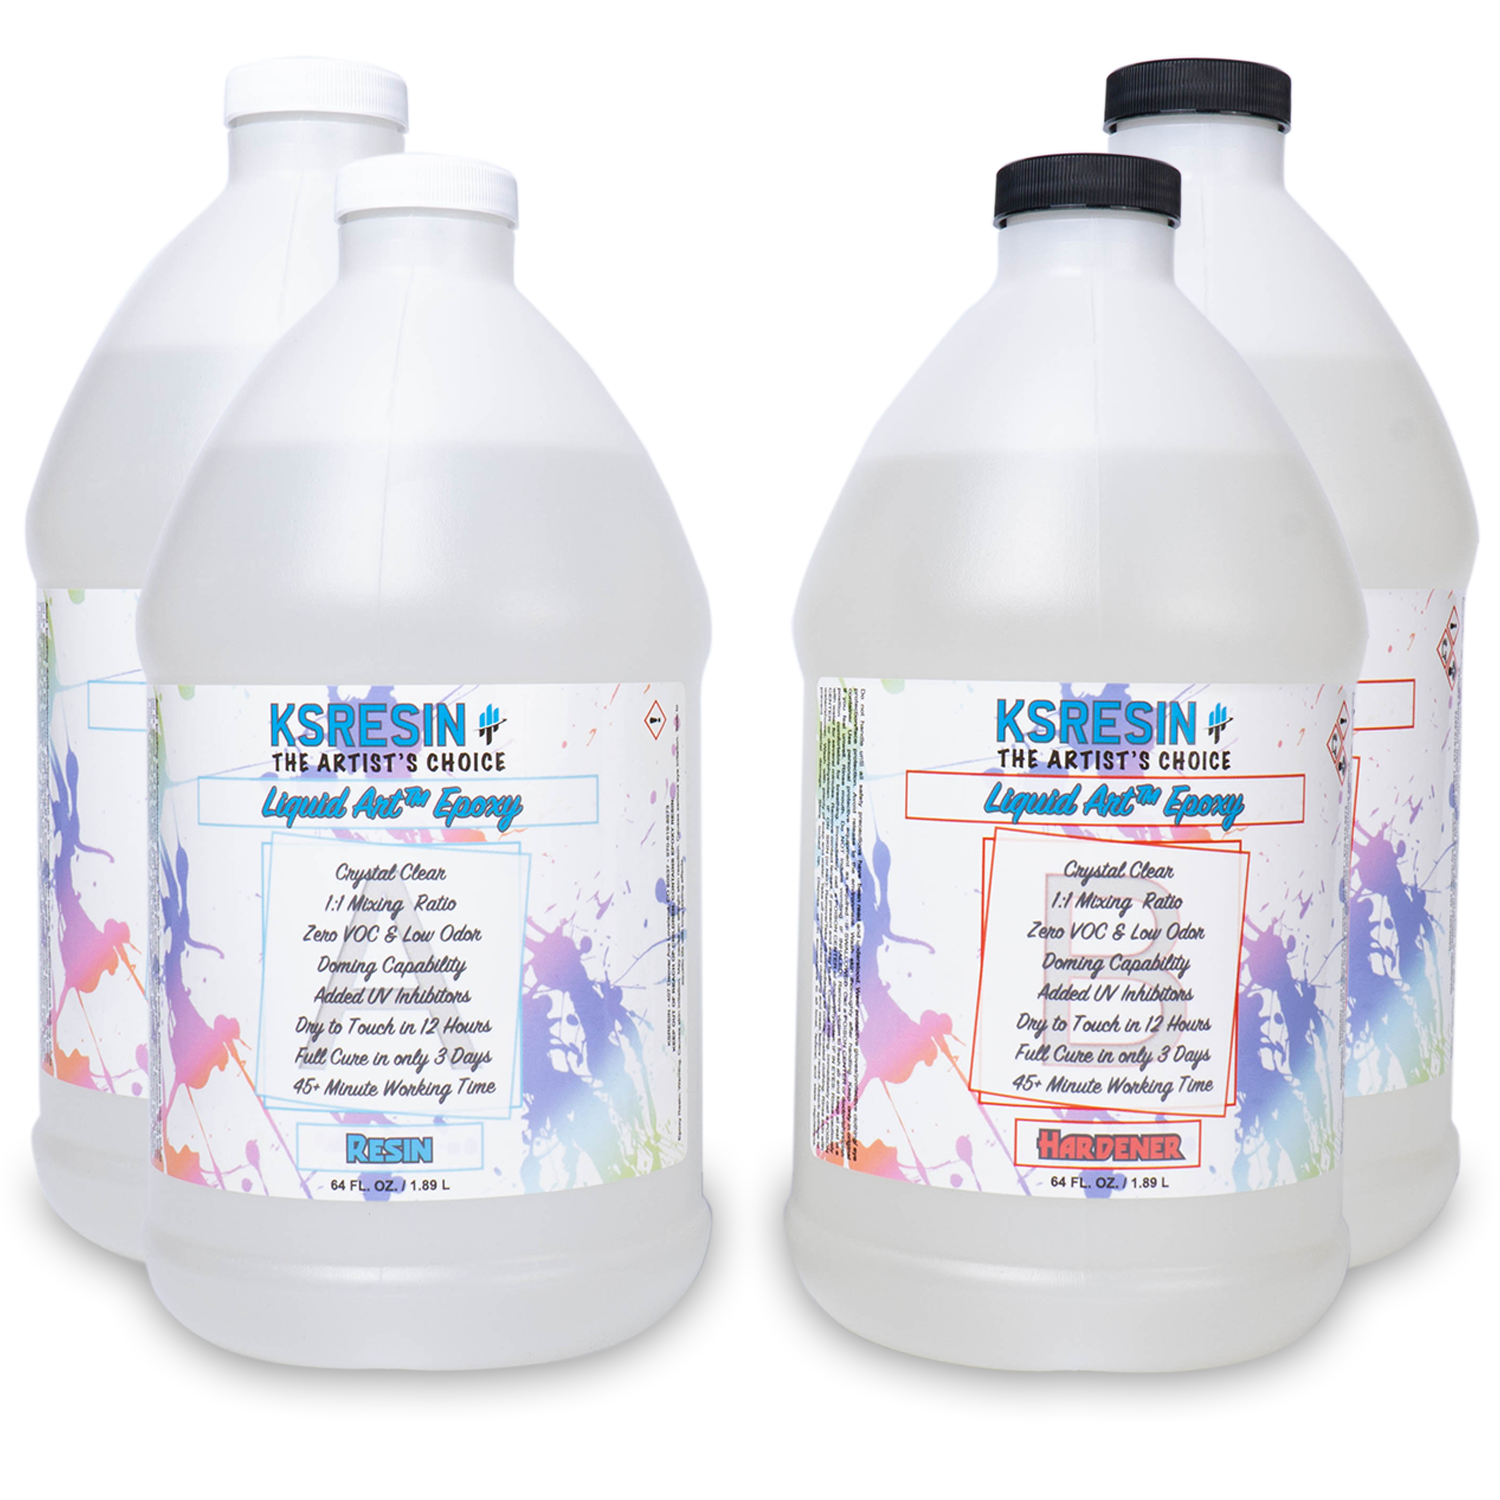 Epoxy Resin 32oz - Crystal Clear Resin Kit for Art Craft Resin